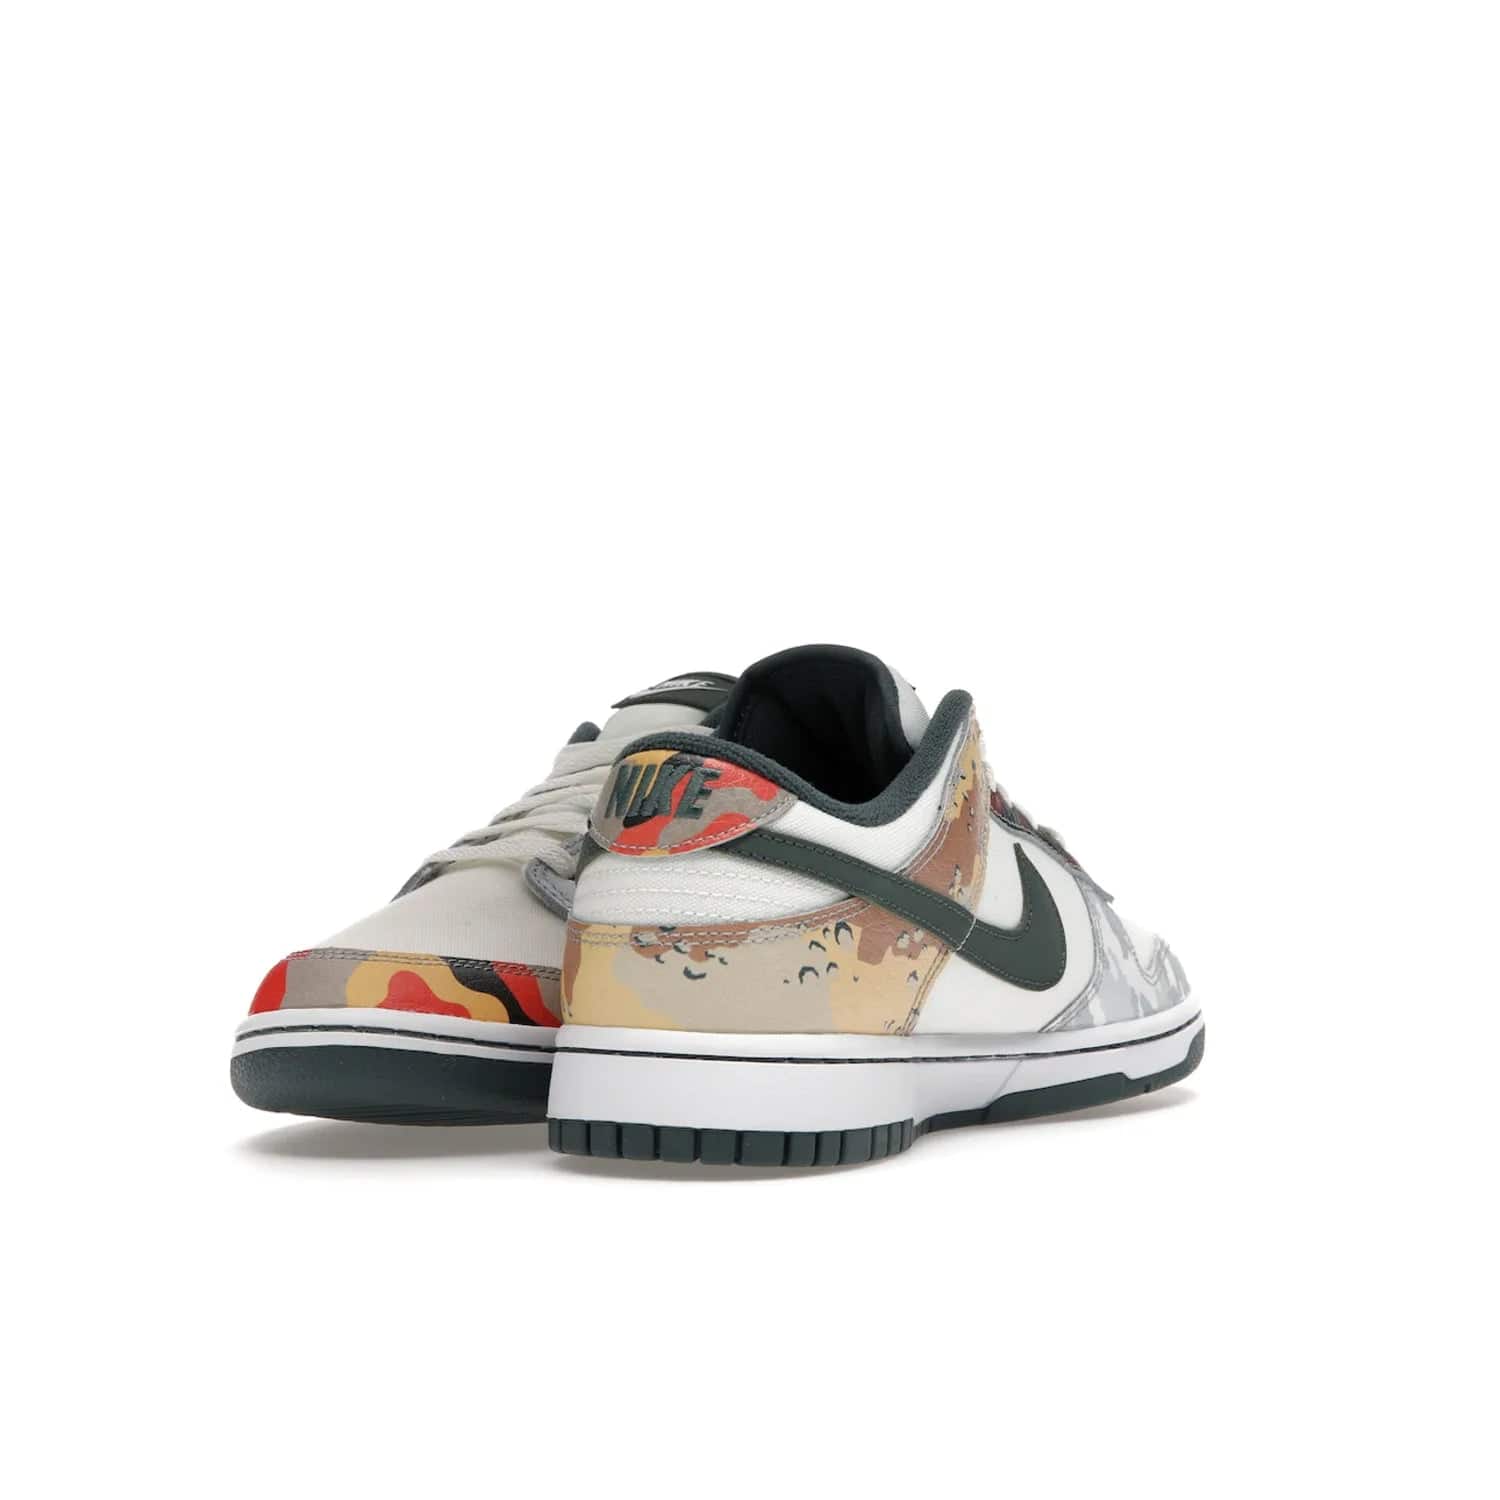 Nike Dunk Low SE Sail Multi-Camo - Image 13 - Only at www.BallersClubKickz.com - Classic design meets statement style in the Nike Dunk Low SE Sail Multi-Camo. White leather base with multi-color camo overlays, vibrant Nike Swooshes, and orange Nike embroidery. Get yours August 2021.